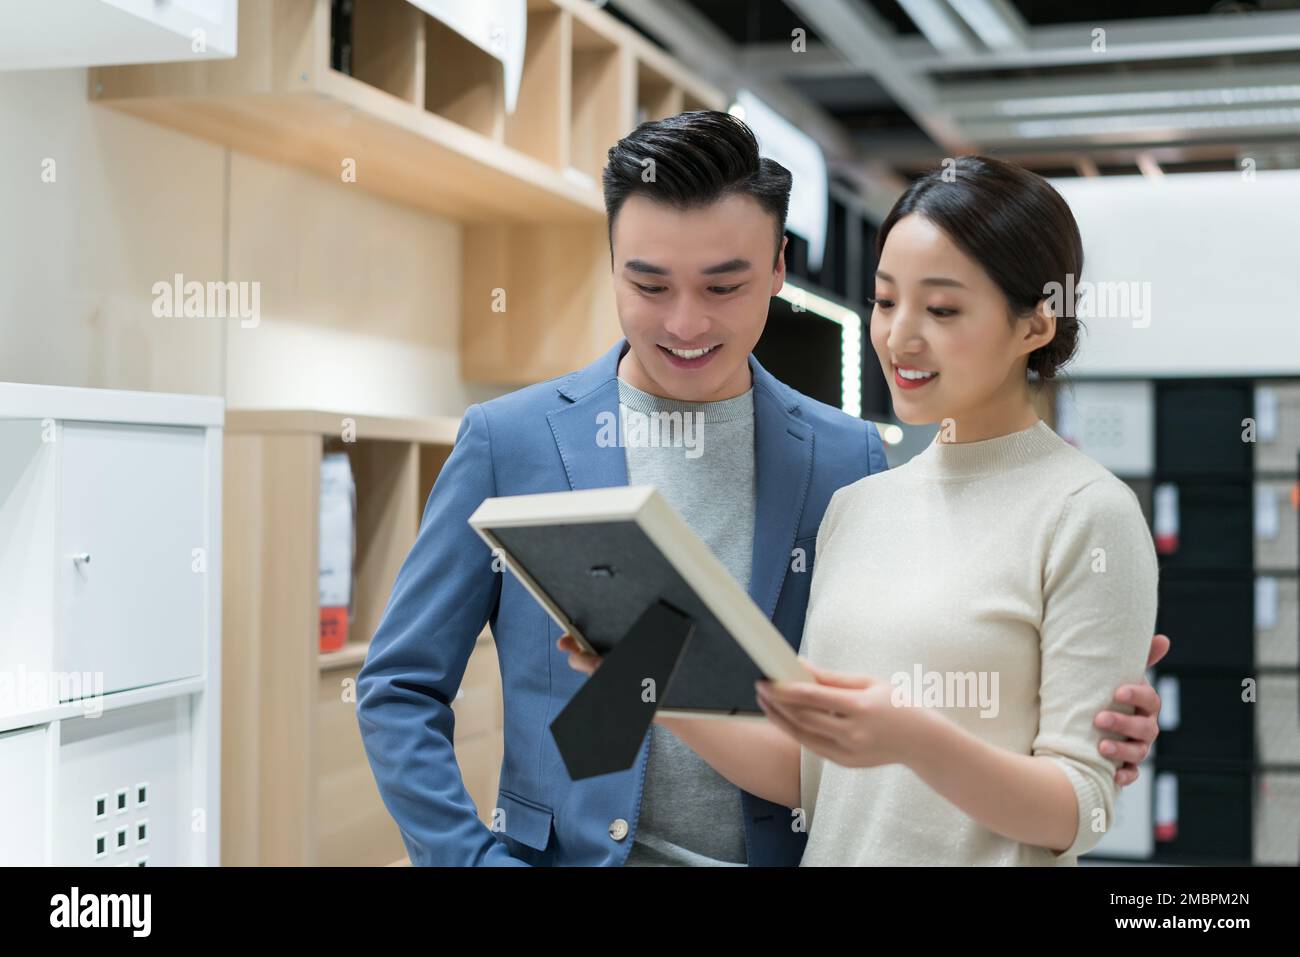 A young couple of choose and buy household items Stock Photo